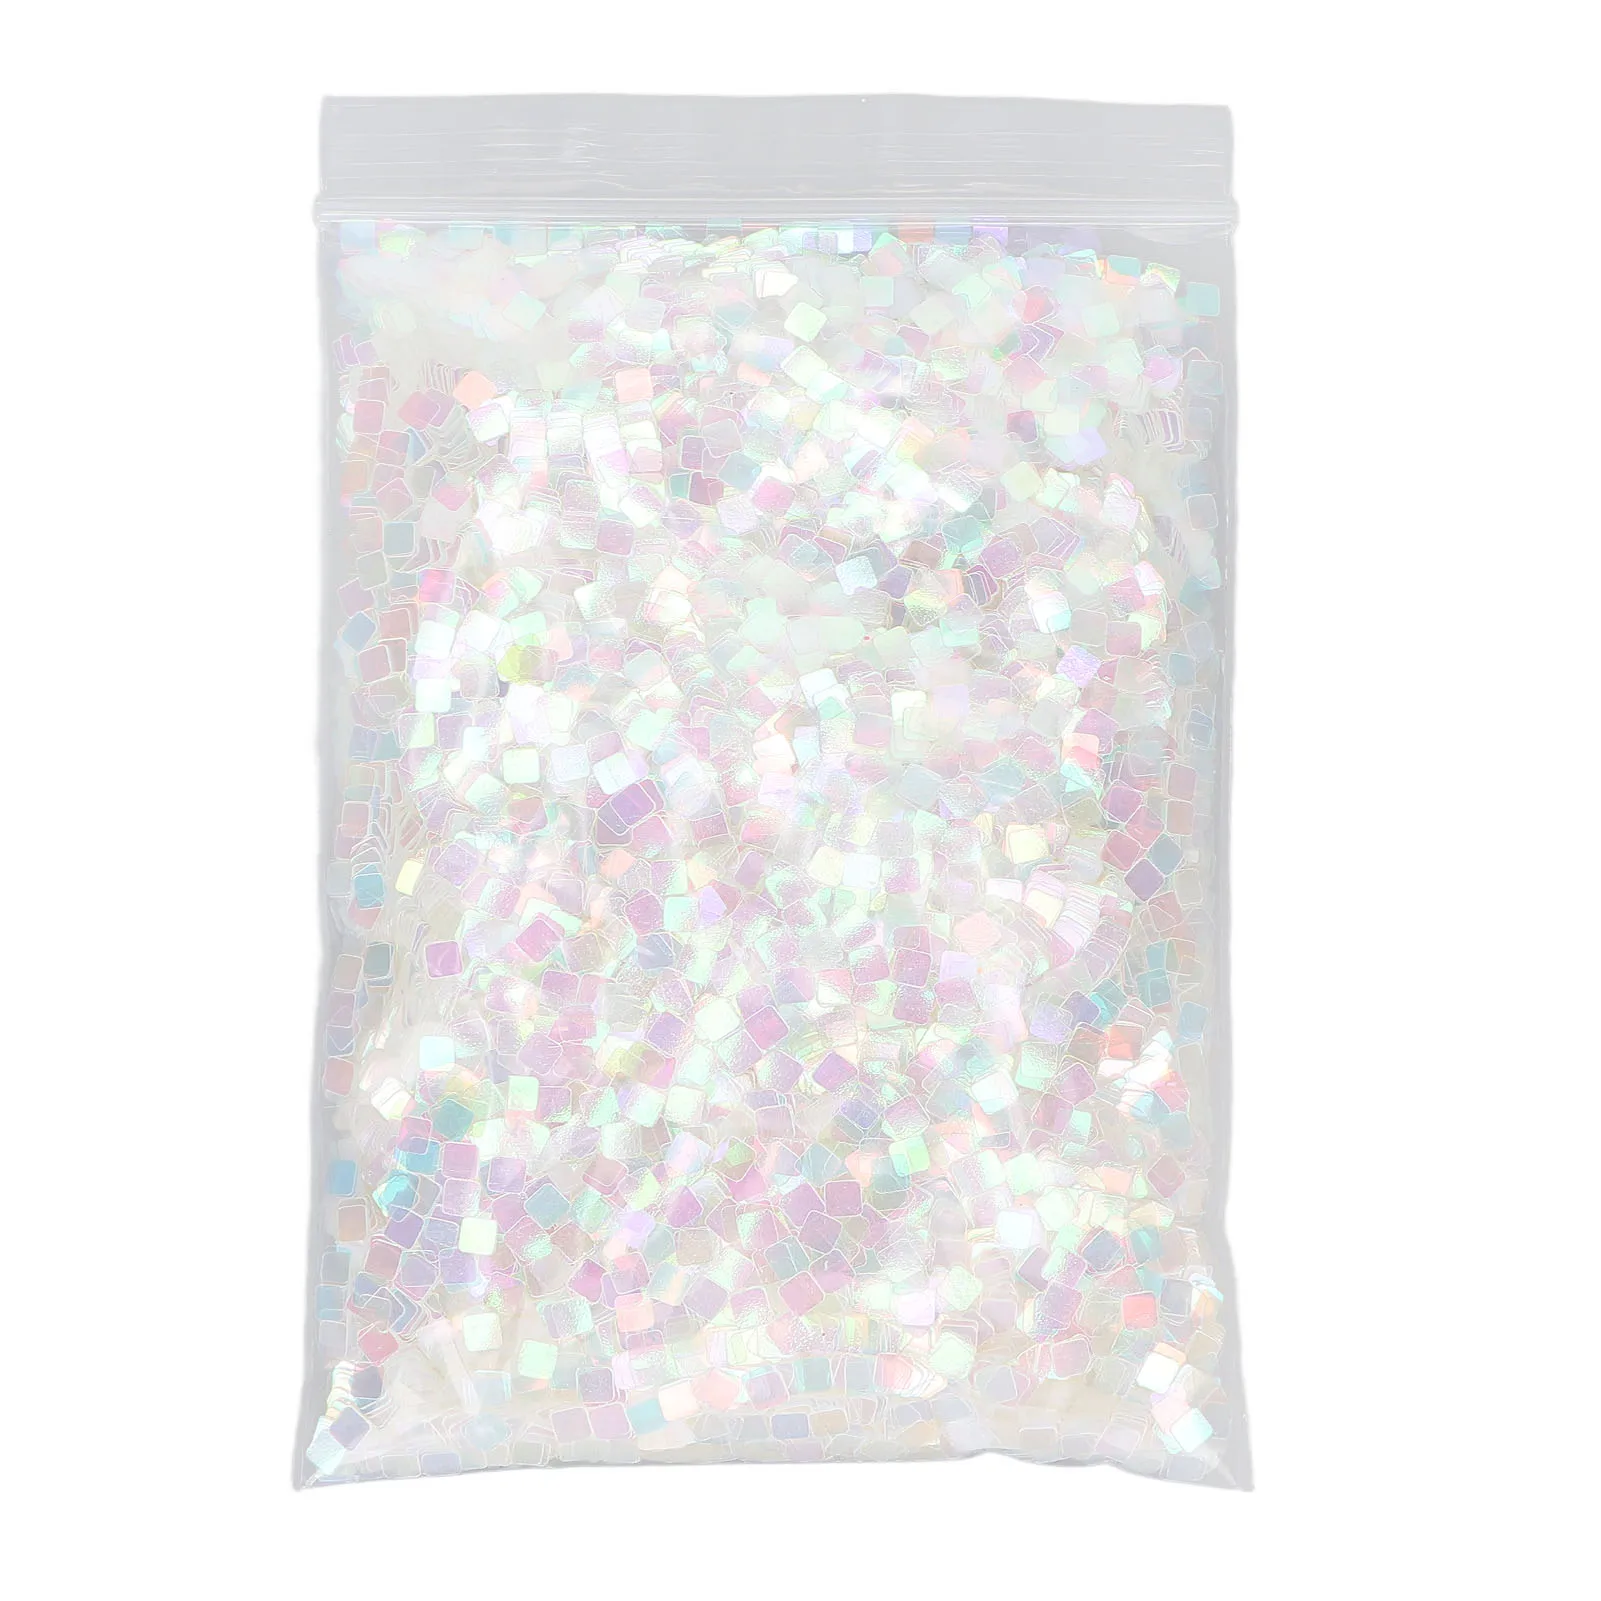 

Nail Art Glitter Sequins DIY Glossy Square Nail Paillette Flakes Decorations for Christmas Party 1.8oz